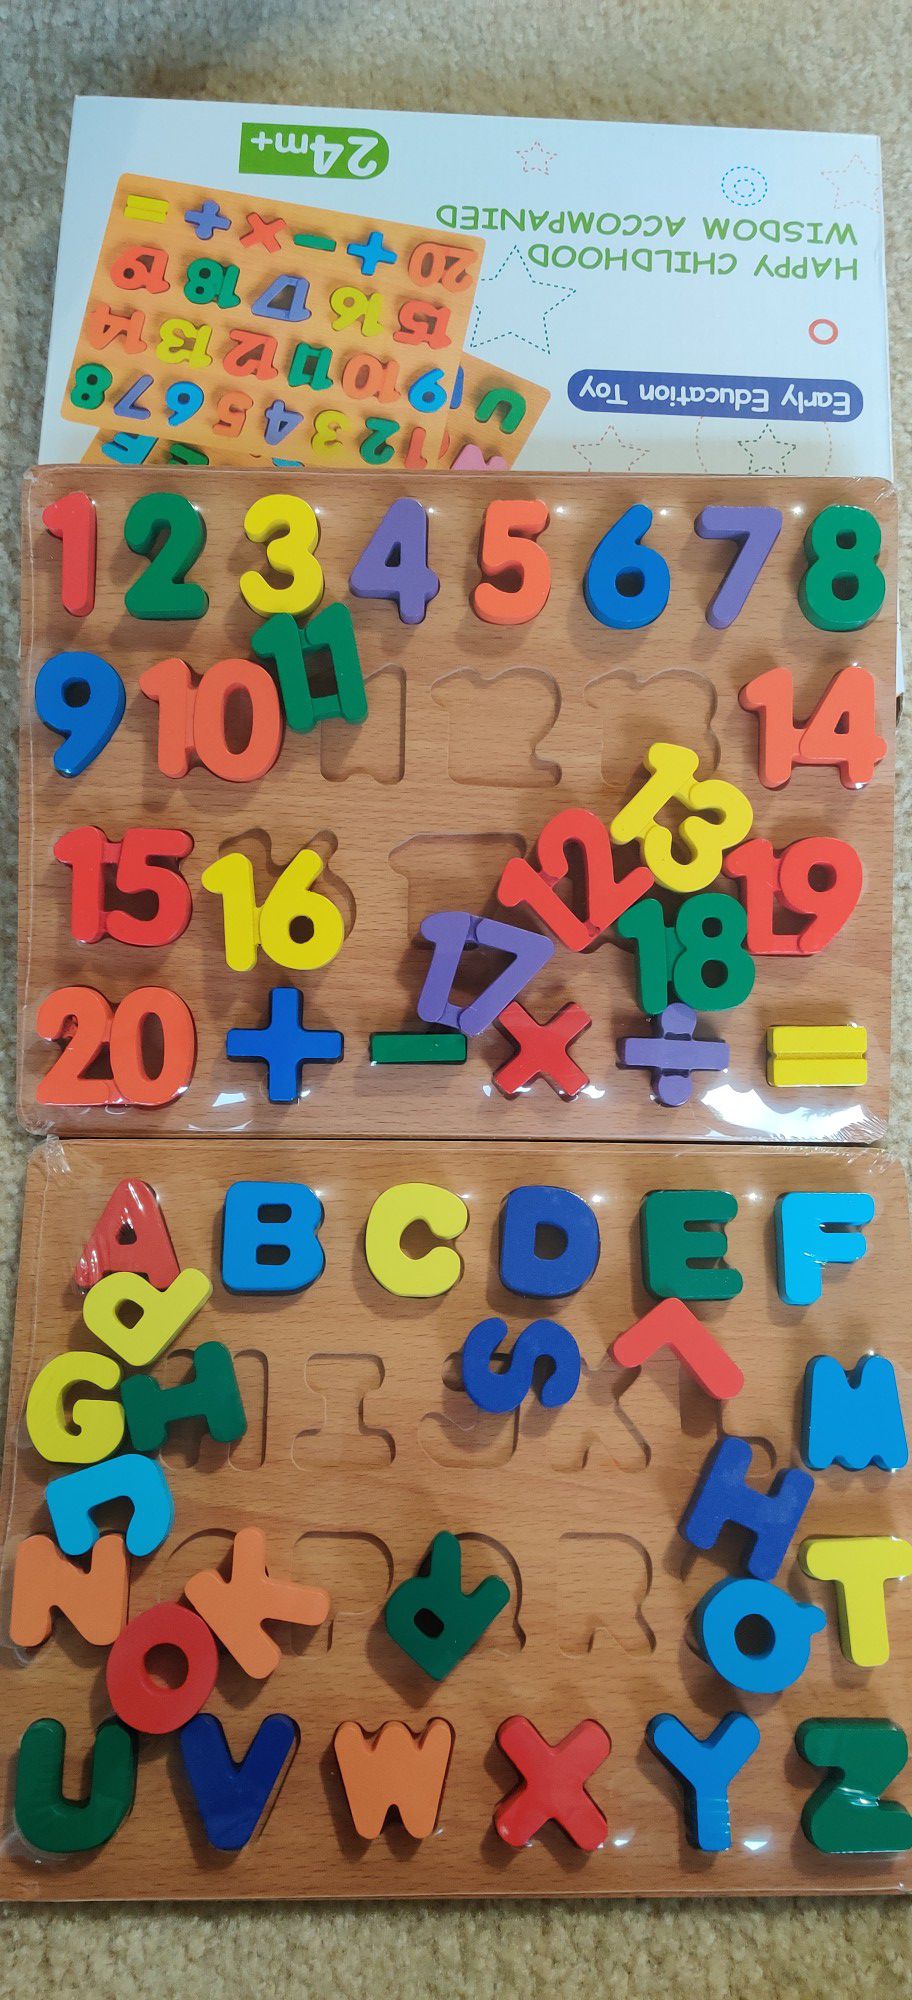 Wooden Alphabet Puzzle, ABC Letter & Number Puzzles for Toddlers, Early Education Learning Toys